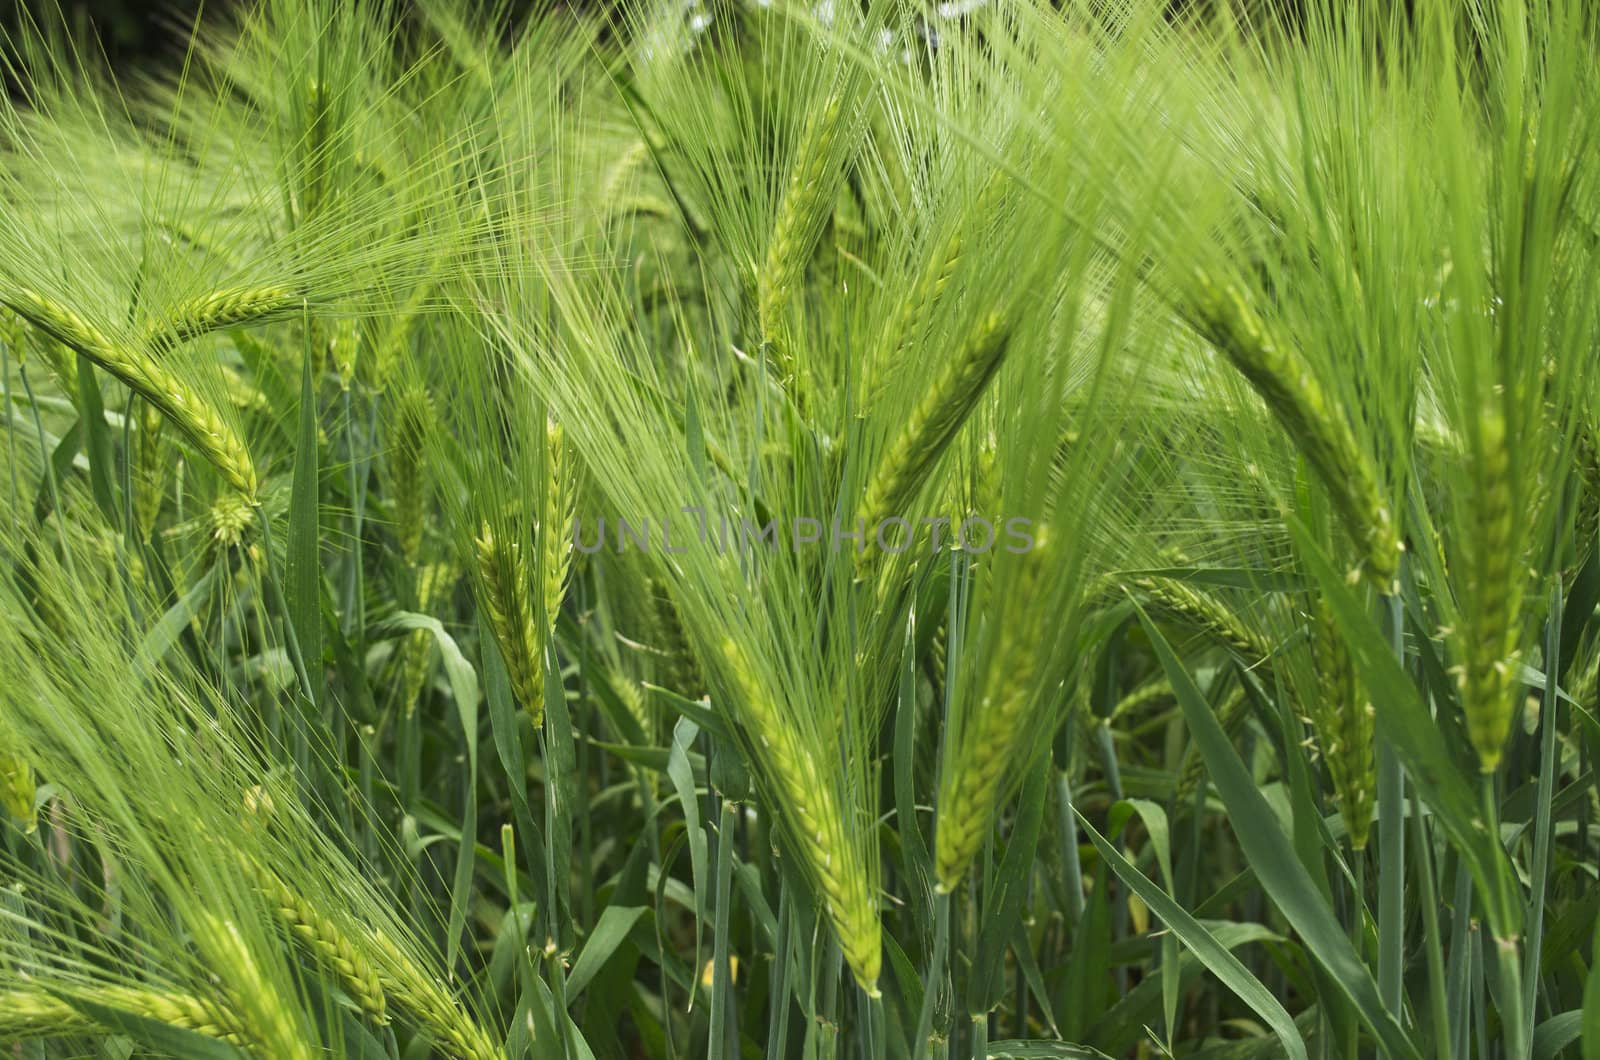 A field of young green barley. Shallow depth of field.